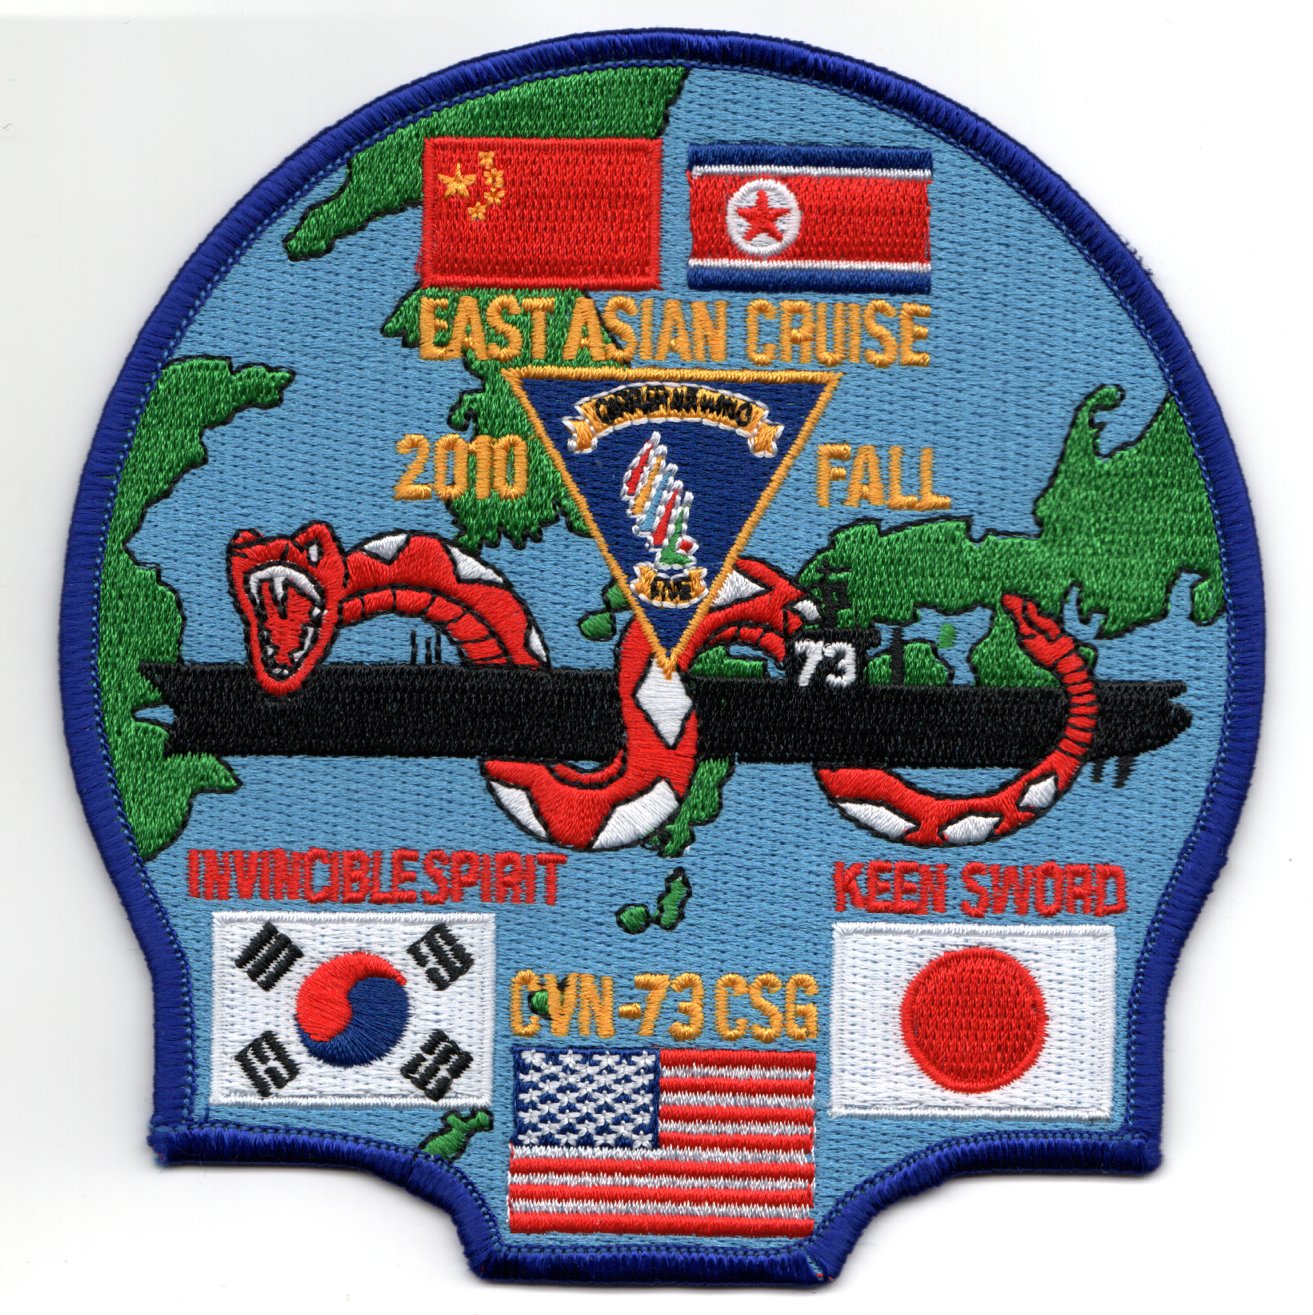 CVN-73/VFA-102 2010 'East Asian' Cruise Patch